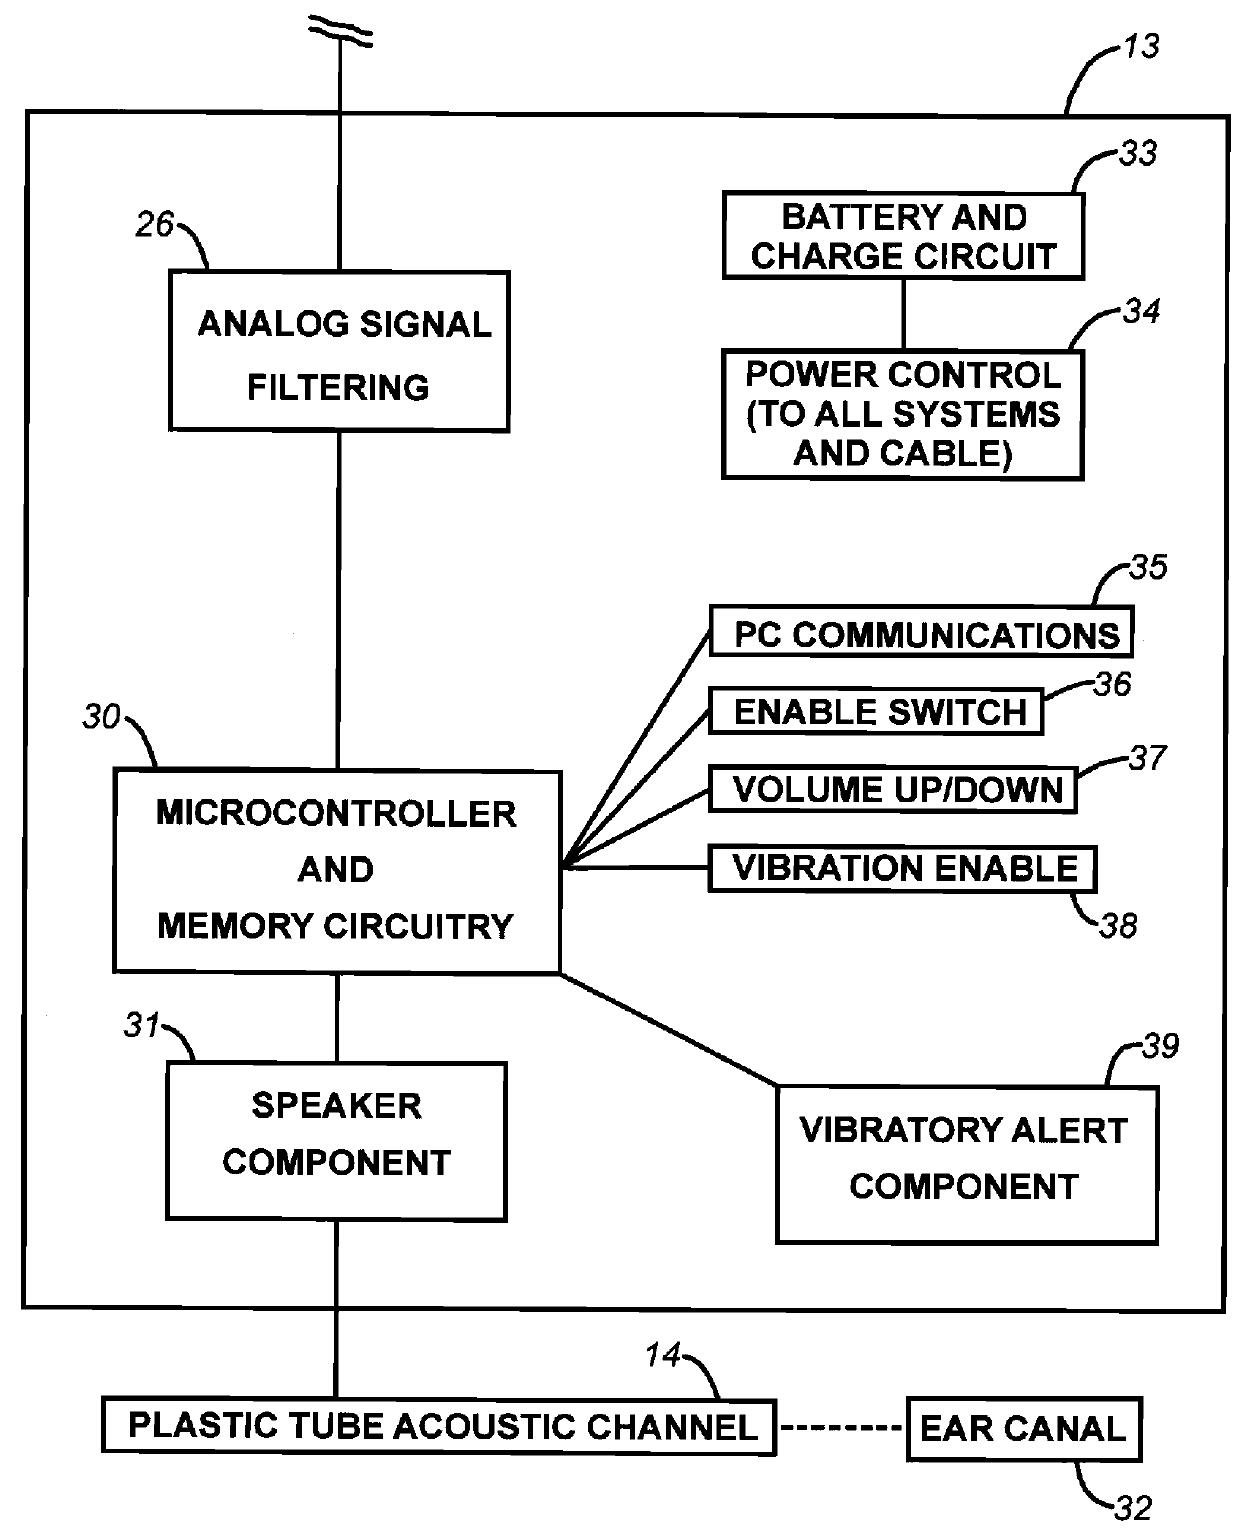 Speech therapy system and method with loudness alerts